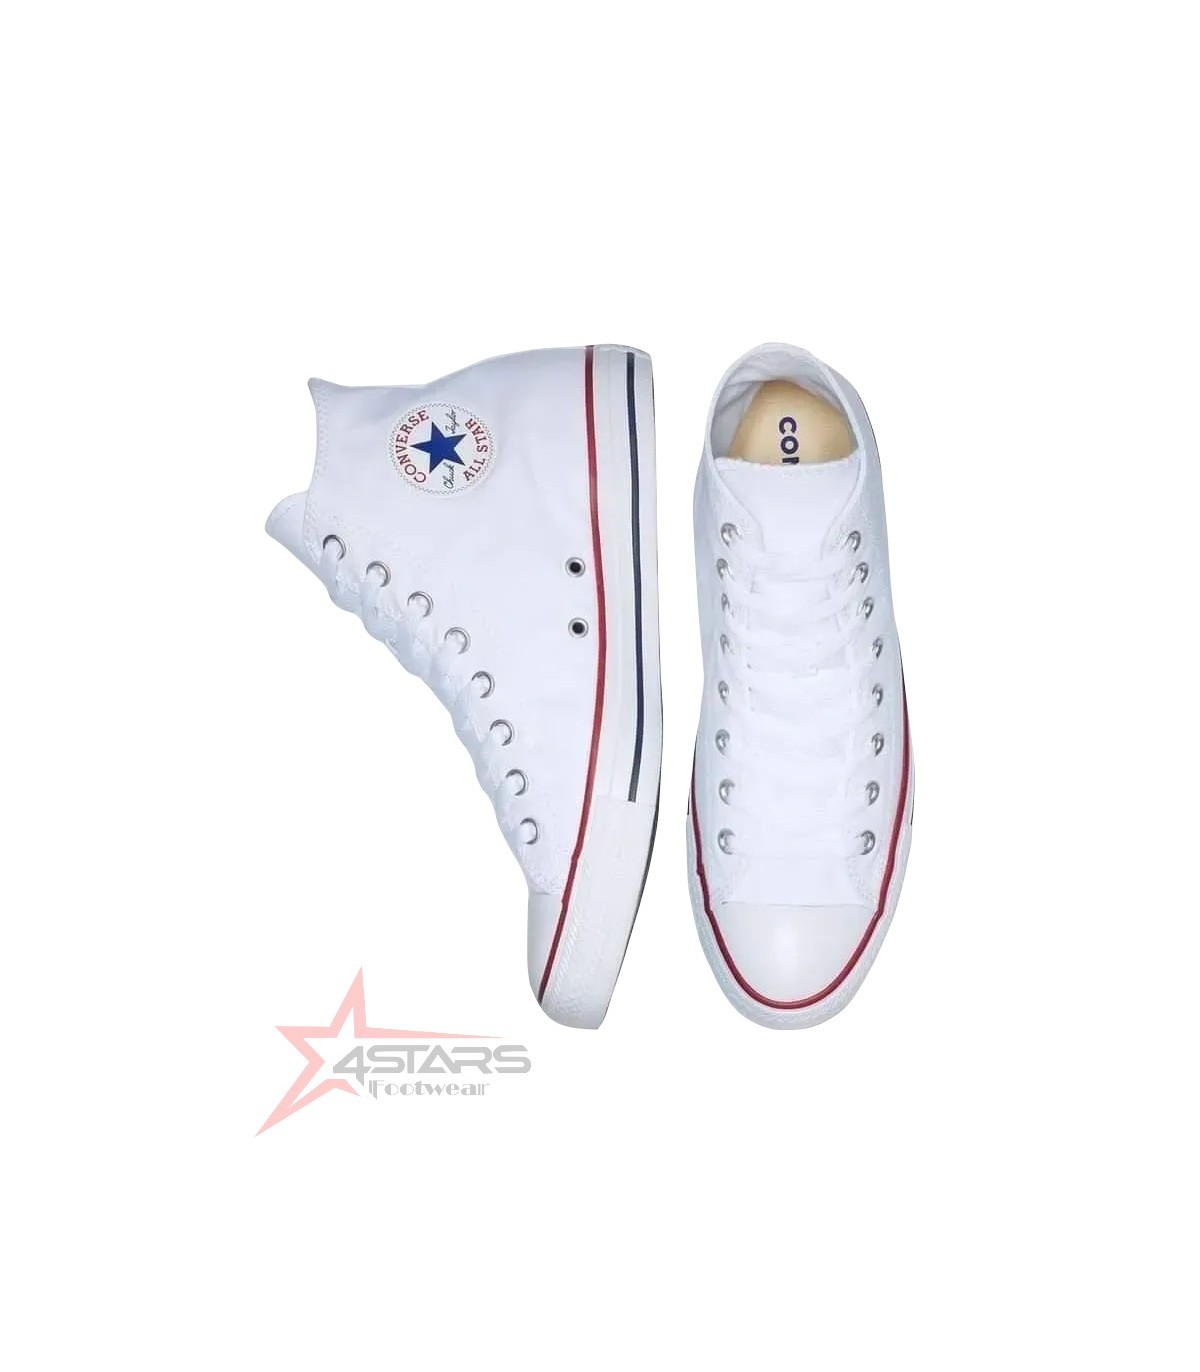 Converse All Star Sneakers High Top White